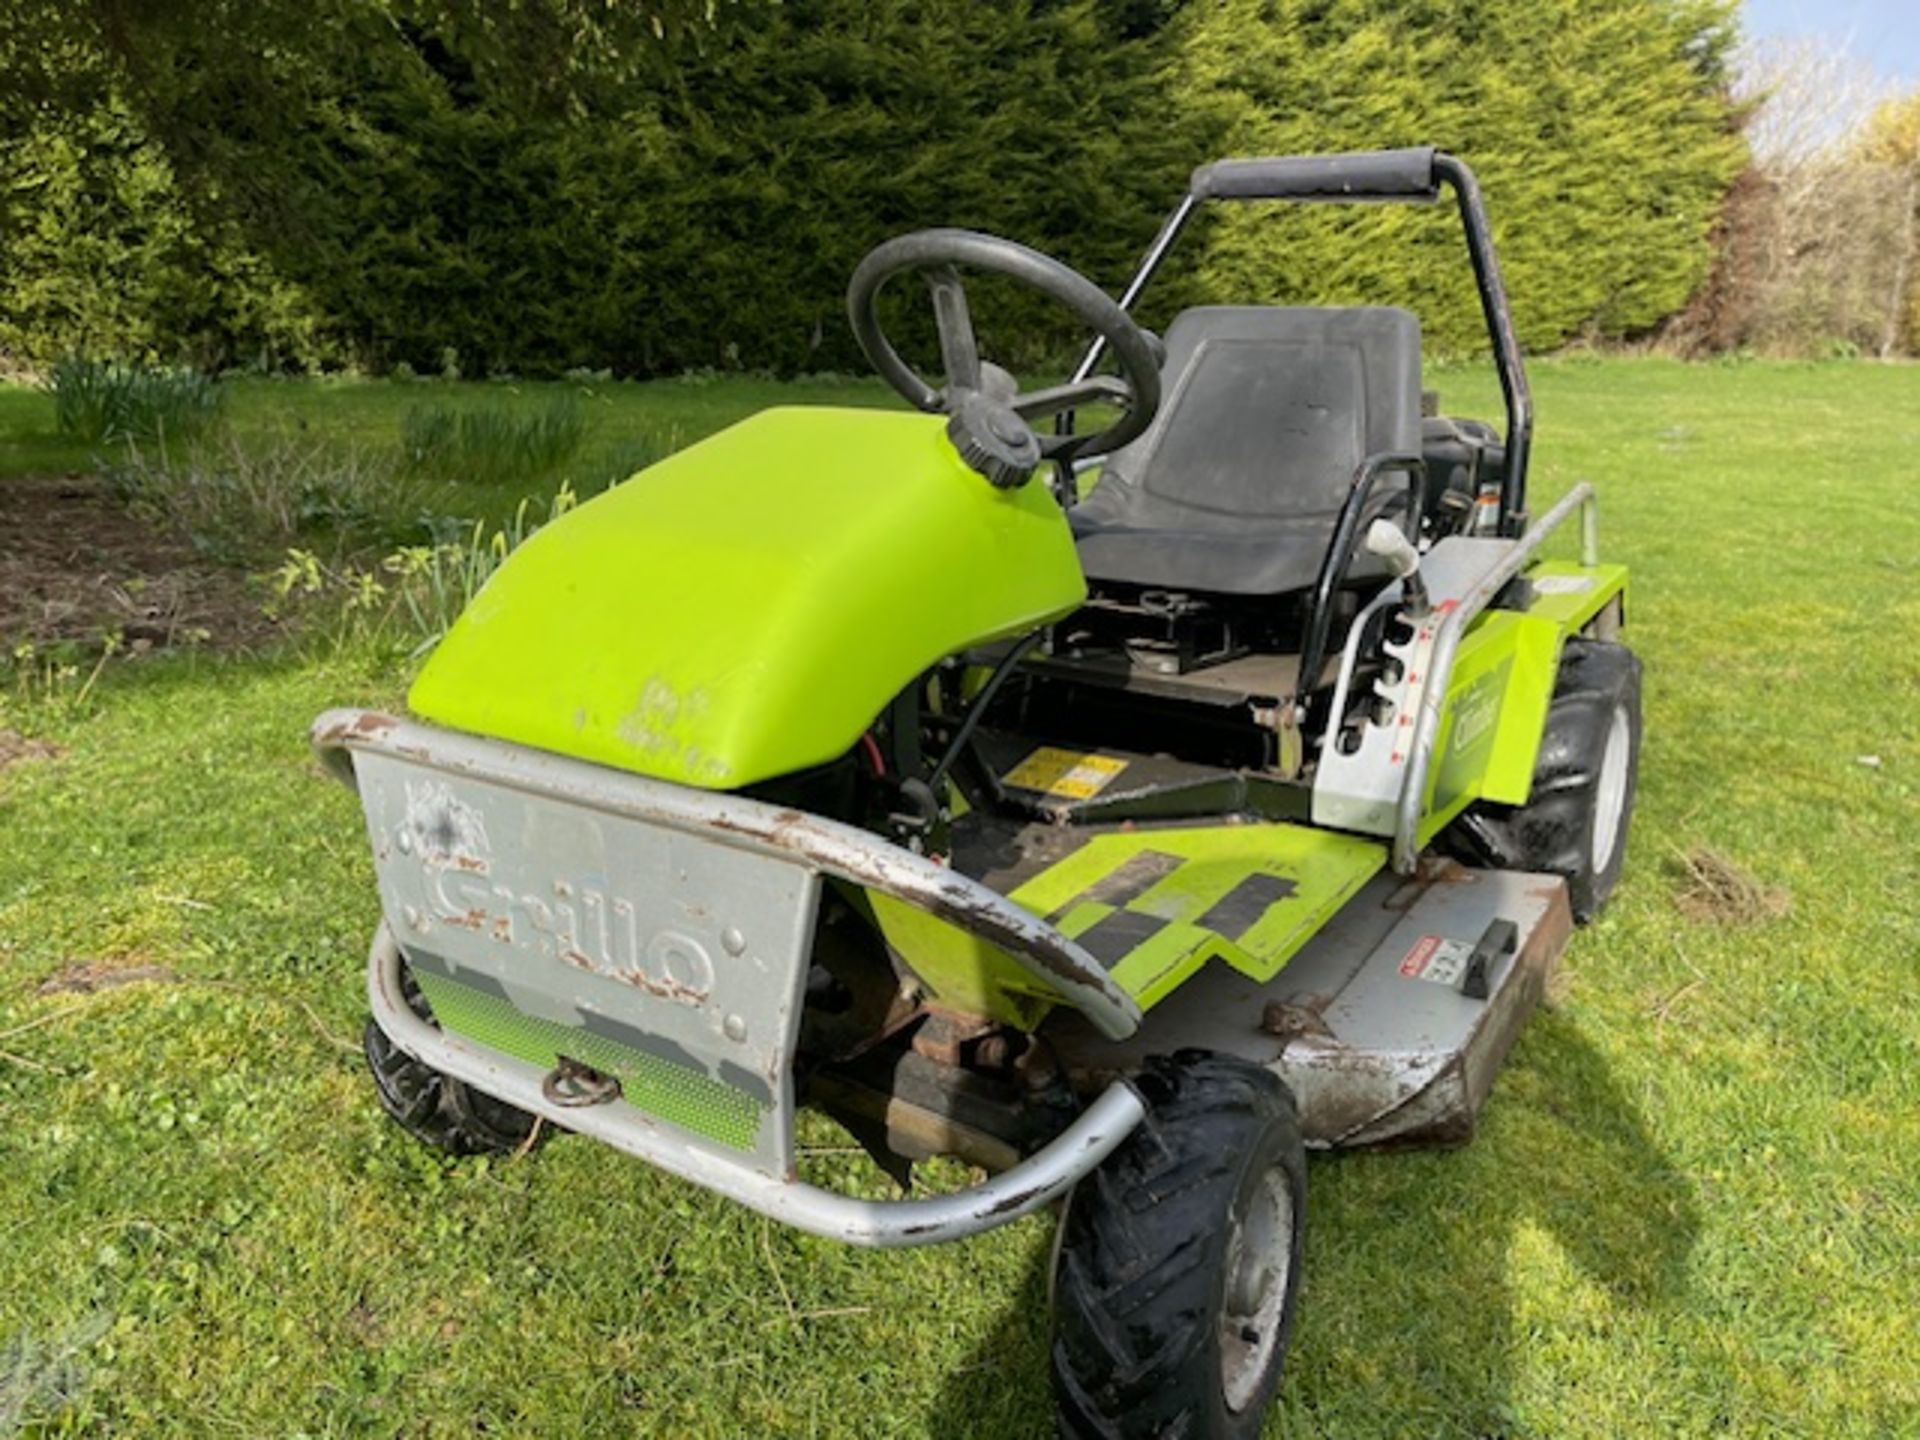 2007, GRILLO CLIMBER 9.21 SERIES RIDE ON MOWER - Image 10 of 10